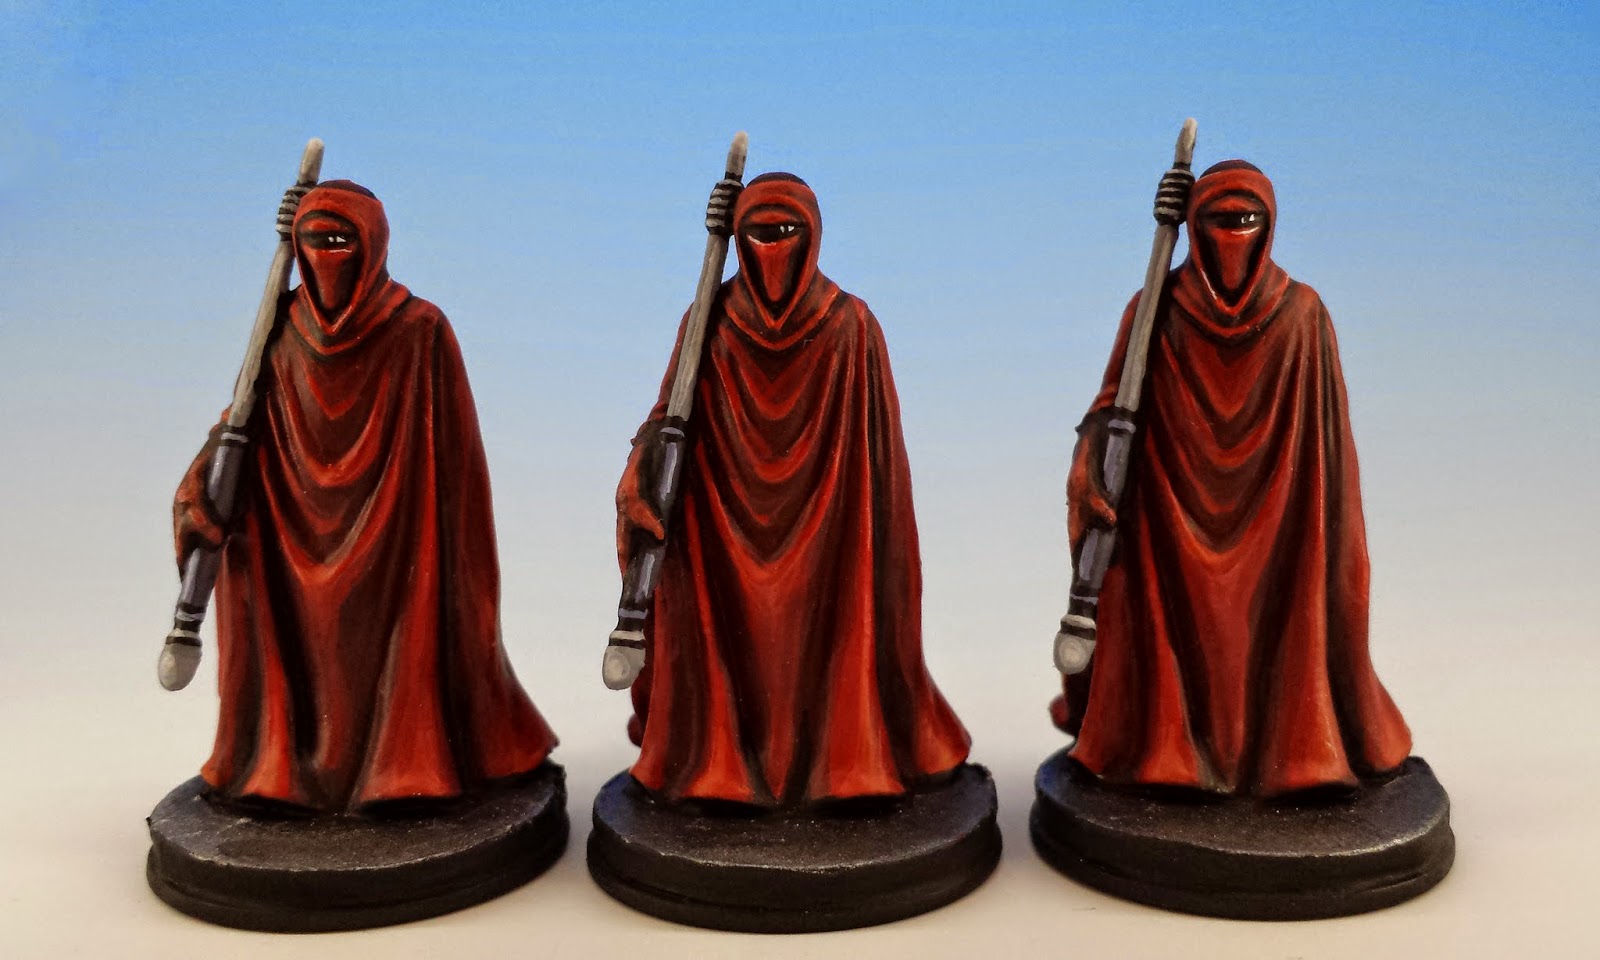 Royal Guard, Fantasy Flight Games (2014, sculpted by Benjamin Maillet, painted by M. Sullivan)